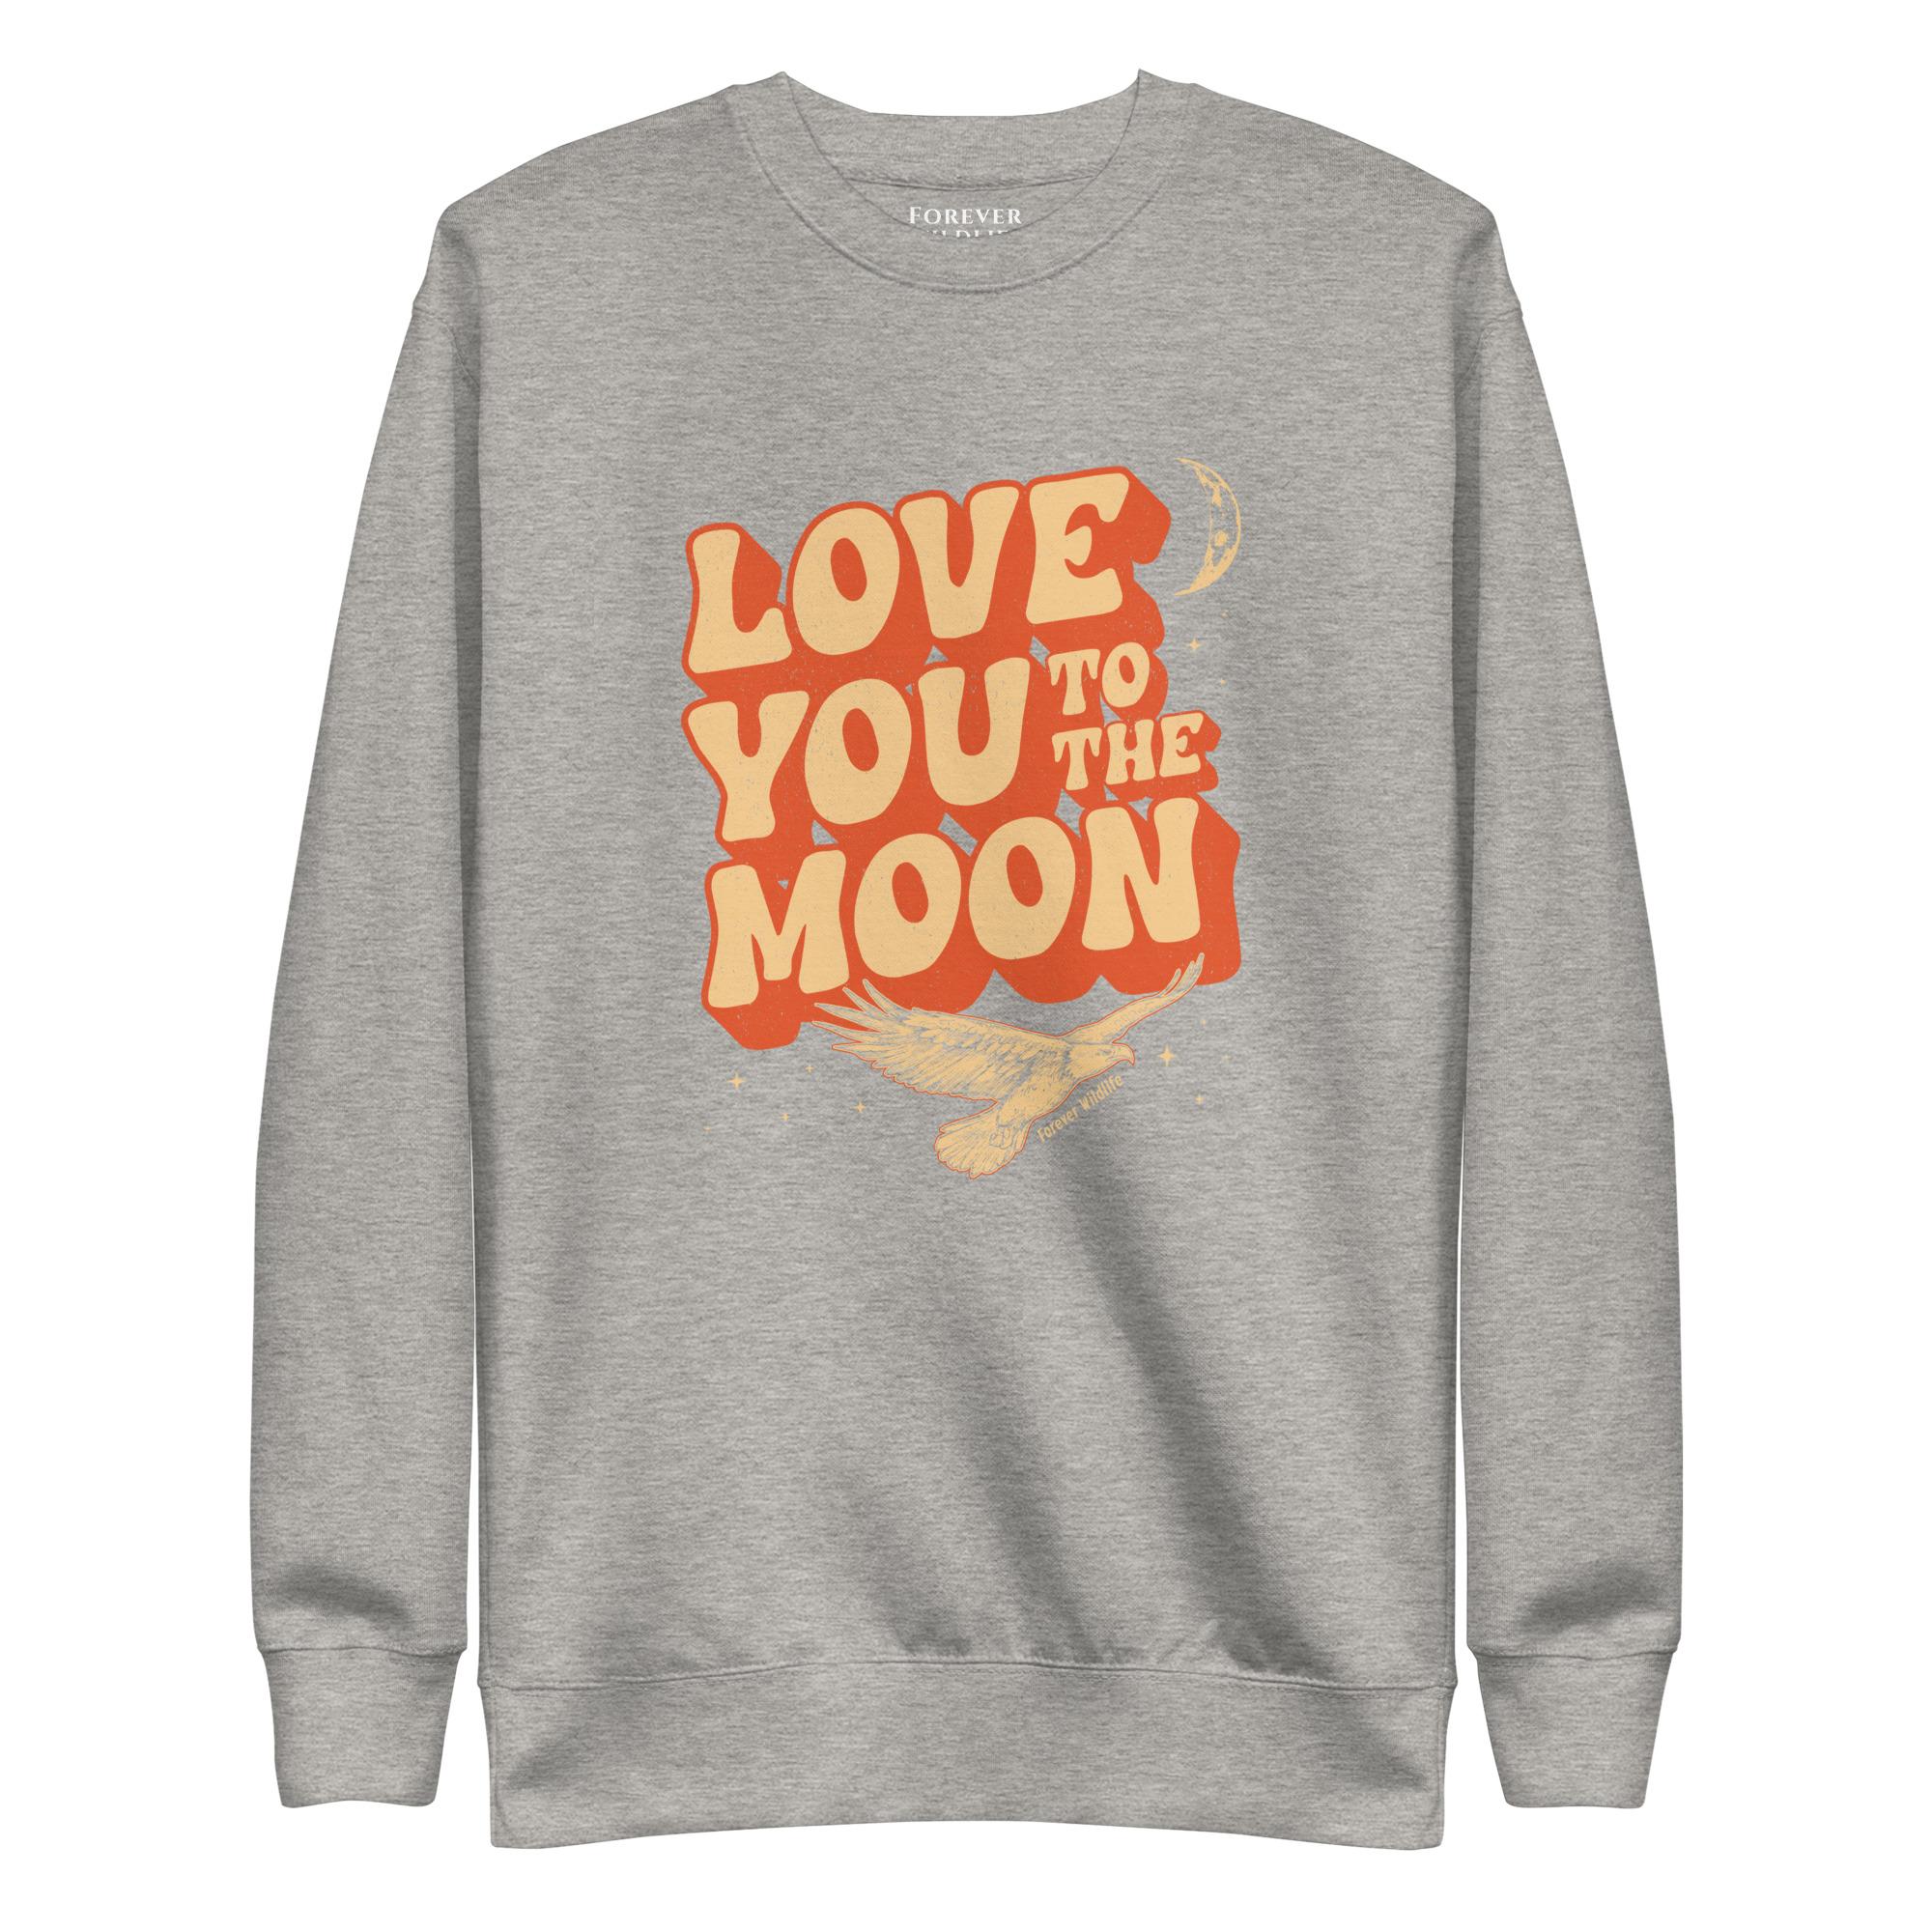  Eagle Sweatshirt in Grey-Premium Wildlife Animal Inspiration Sweatshirt Design with 'Love You To The Moon' text, part of Wildlife Sweatshirts & Clothing from Forever Wildlife.